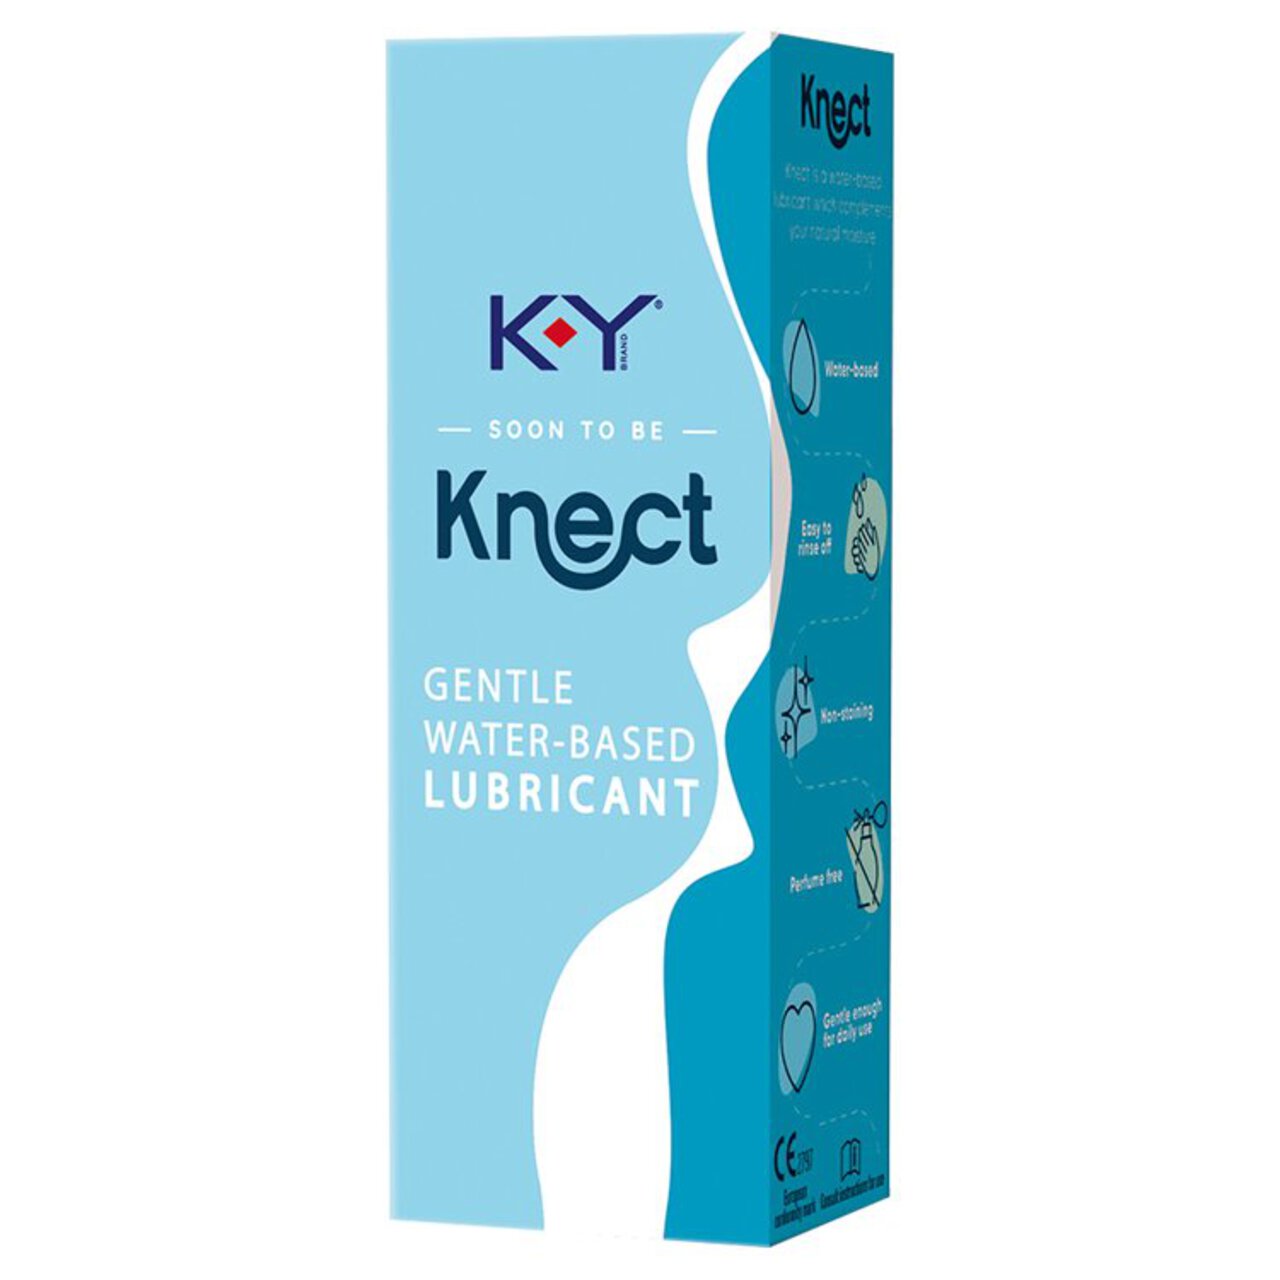 KY Knect Personal Water Based Lubricant 75ml